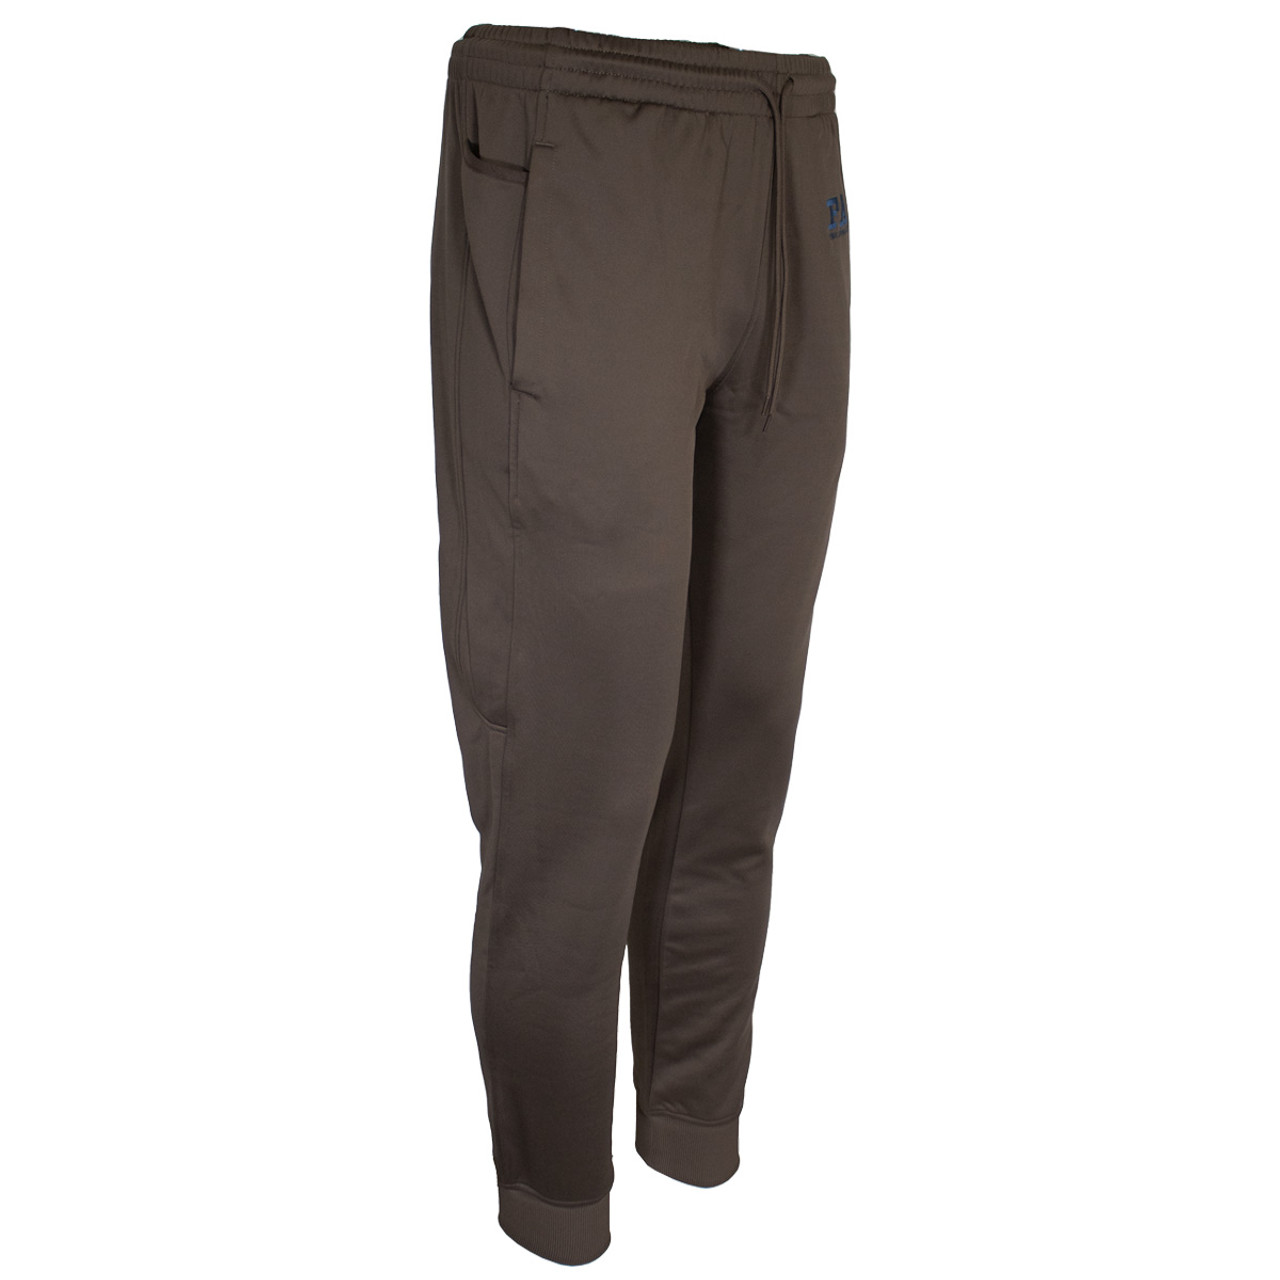 Heybo Outdoors Adds New Wader Pants to Delta Series